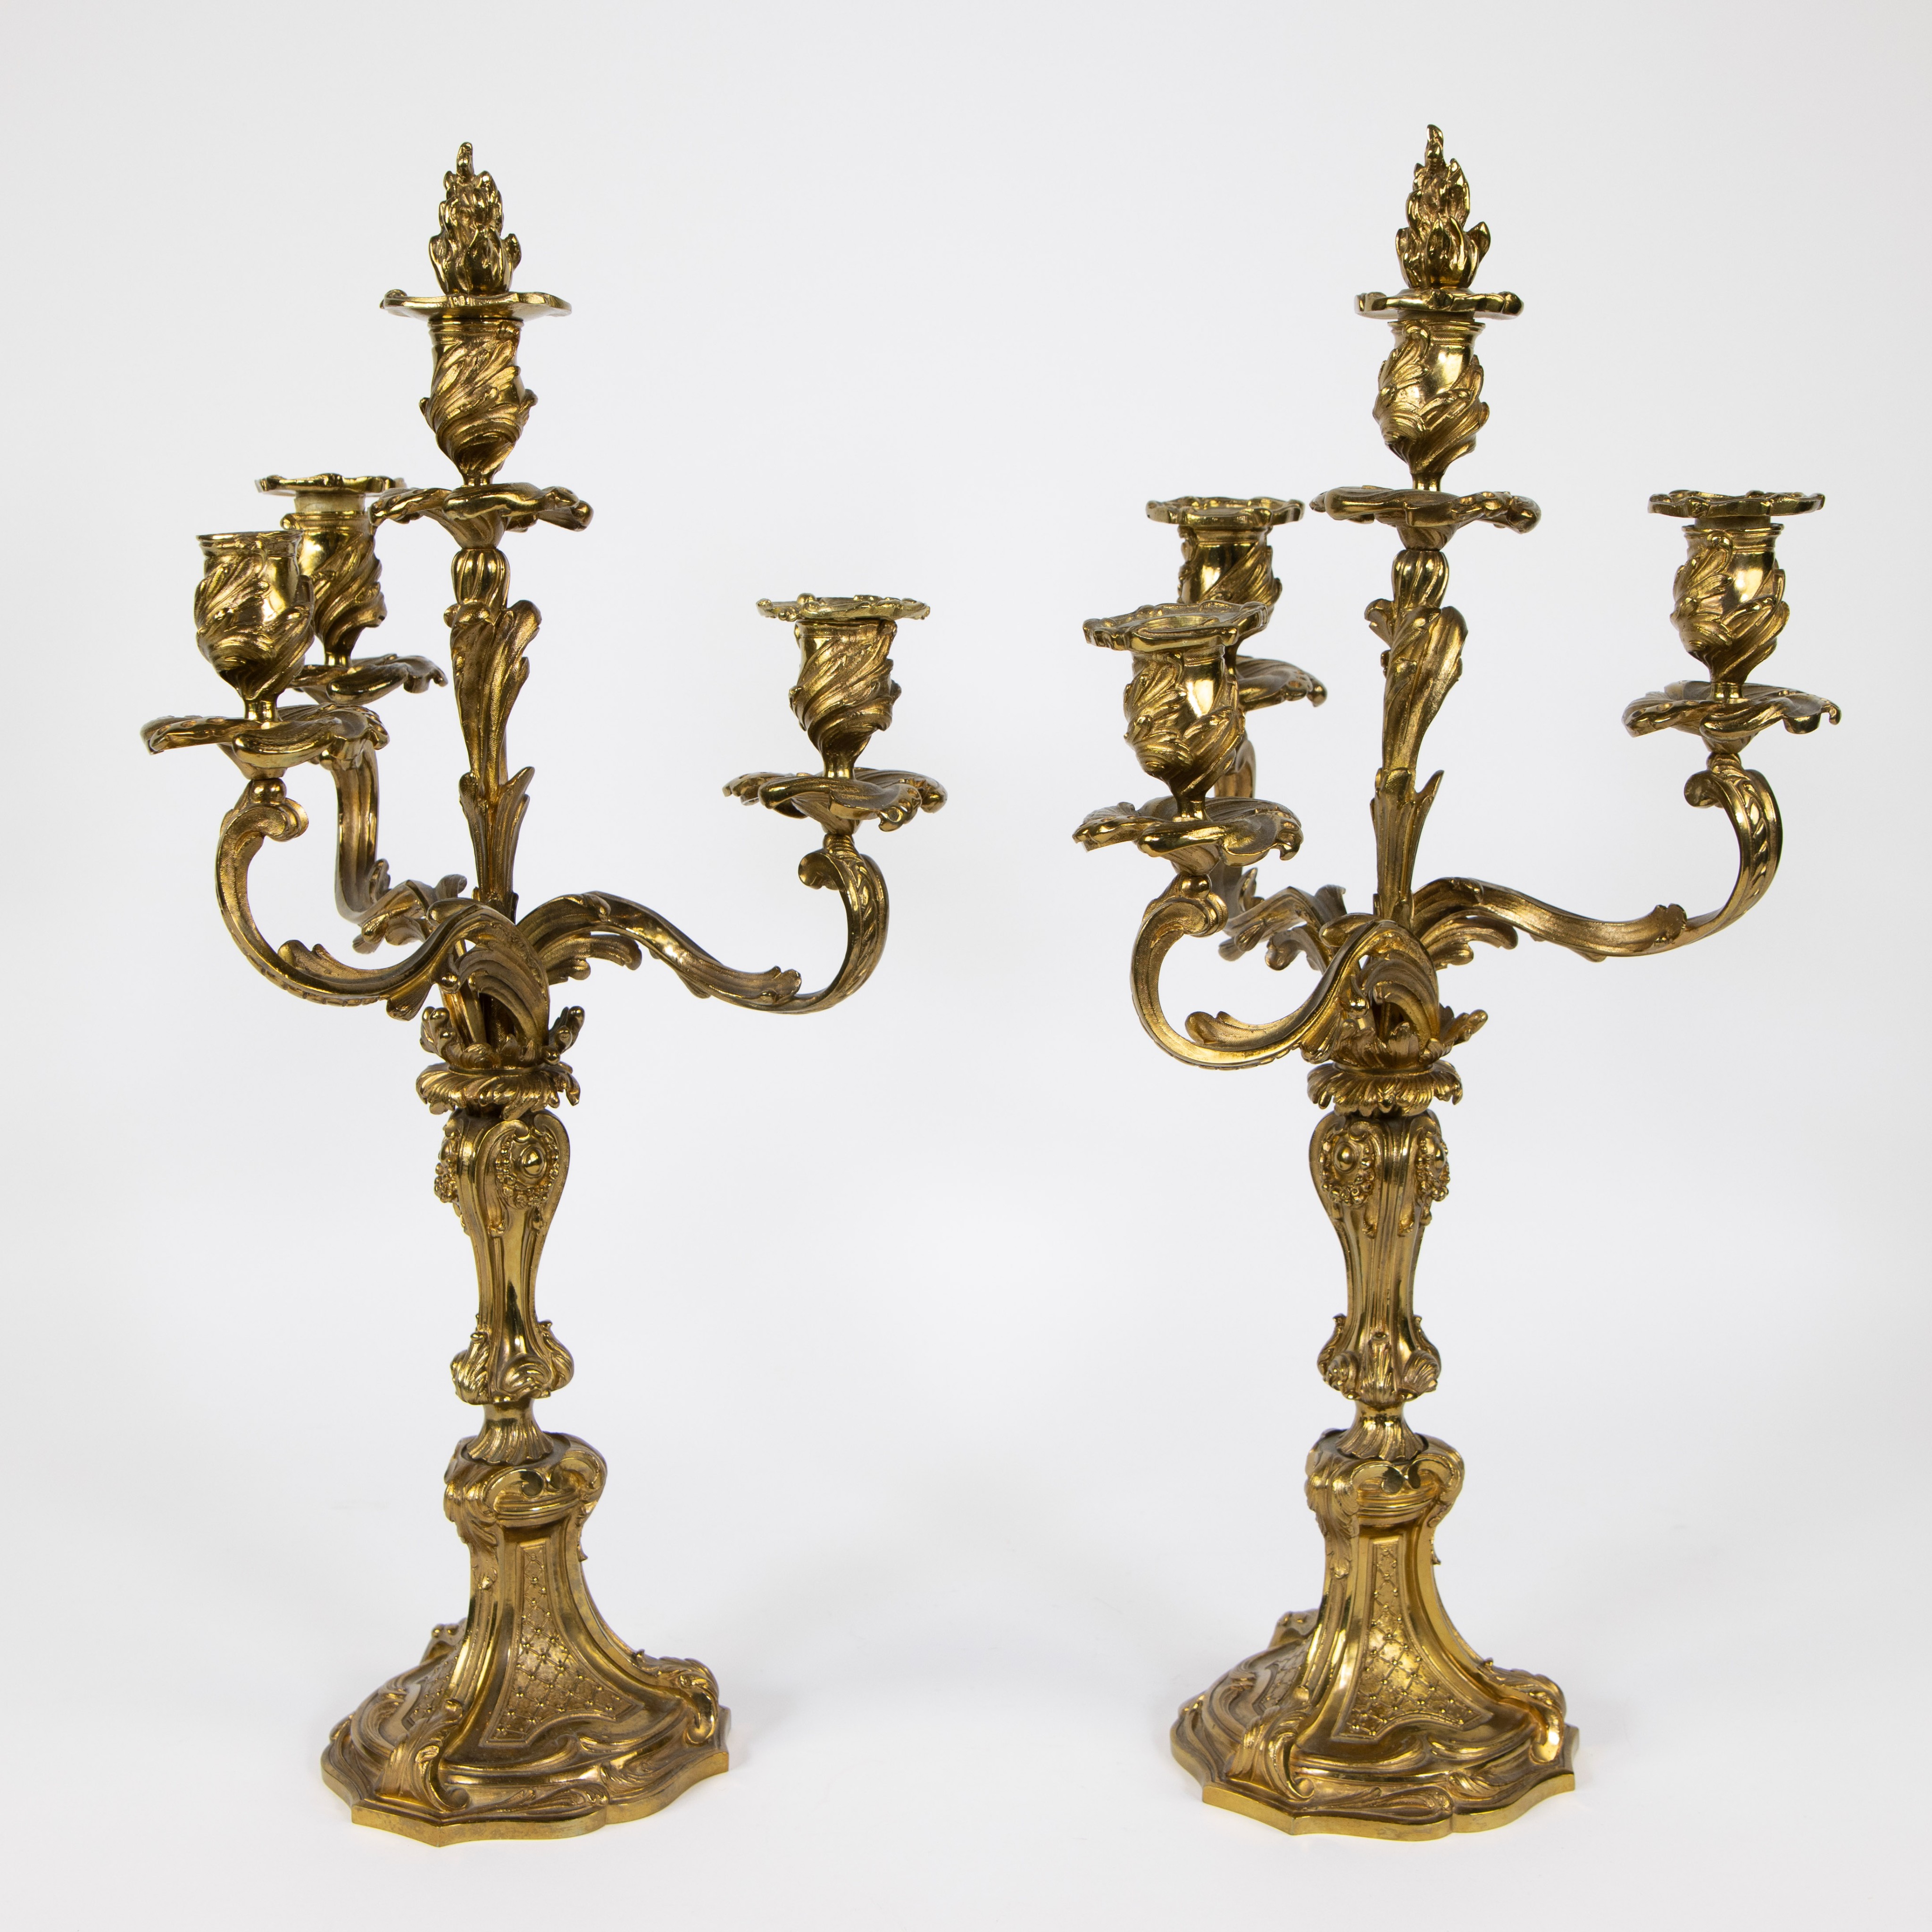 A pair of French gilt bronze Louis XV style four-light candlesticks, 19th/20th C. - Image 2 of 4